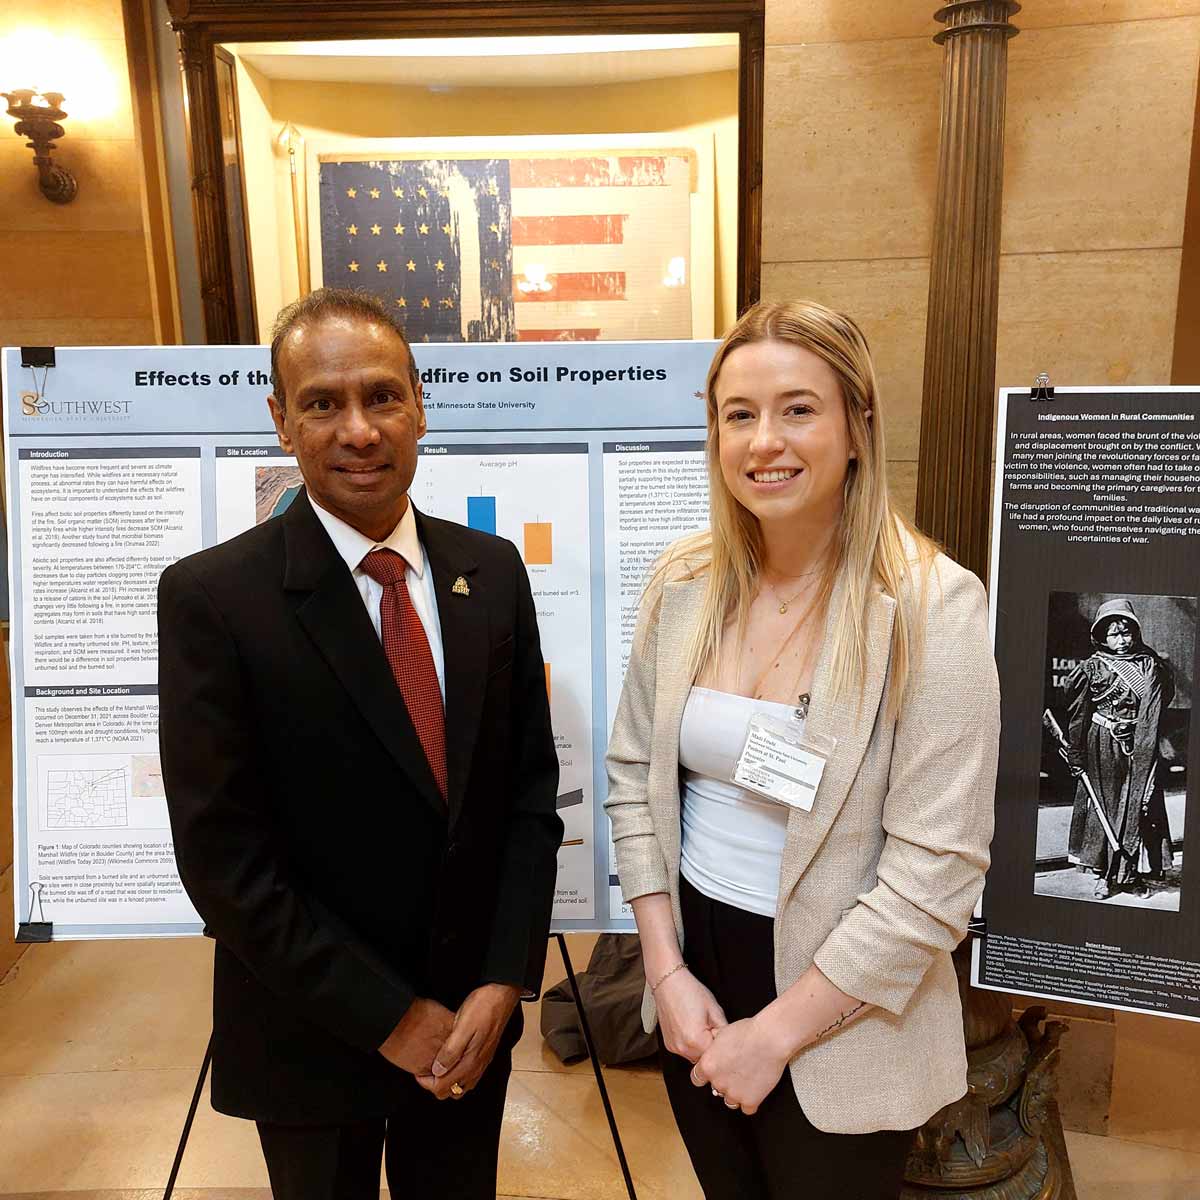 Six SMSU Students Participate in Posters at St. Paul Event Featured Image